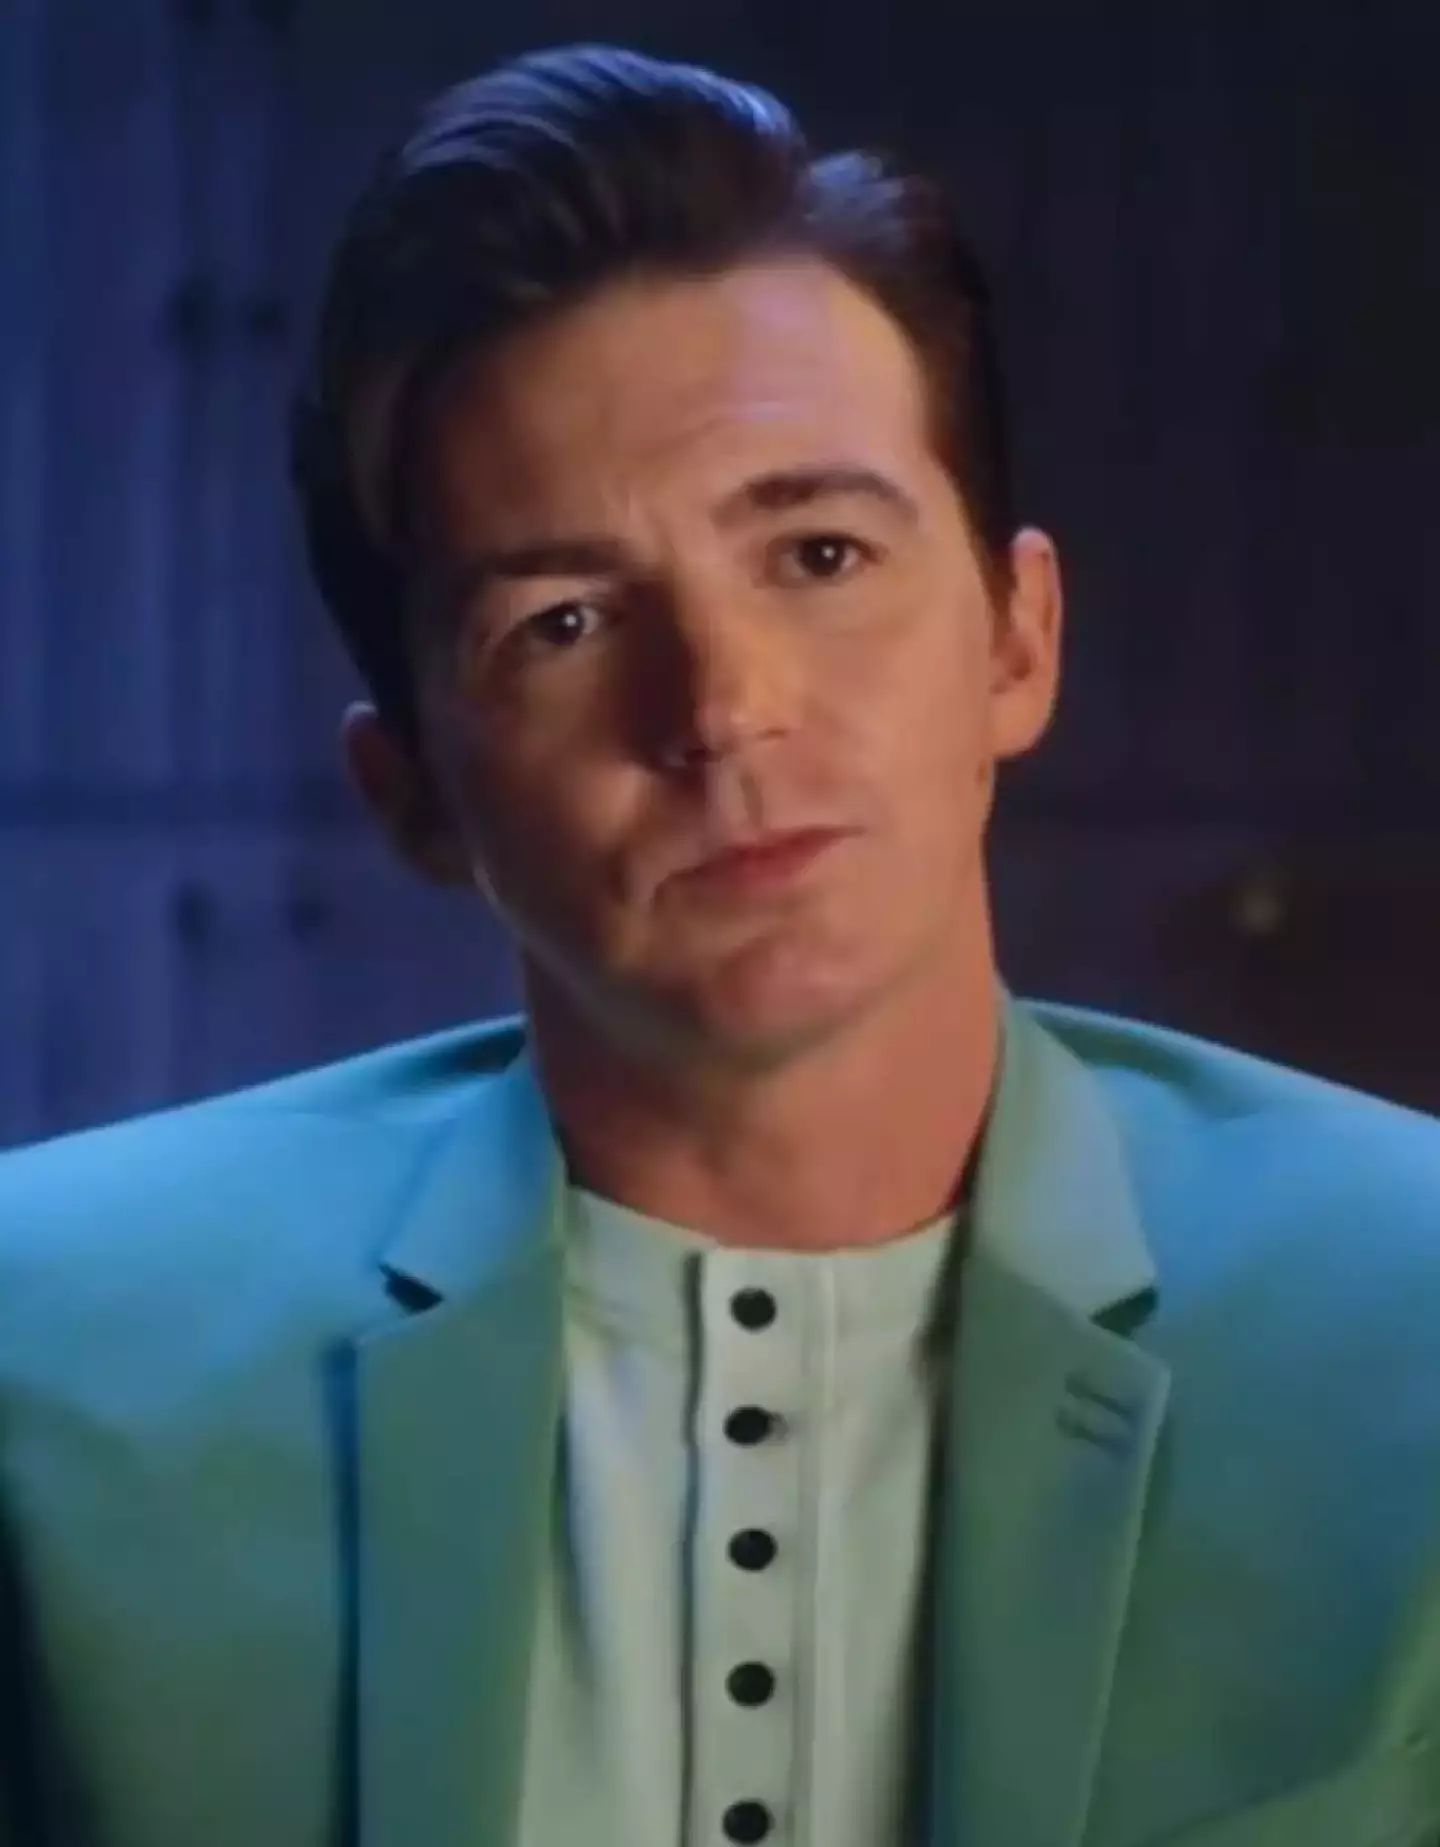 Drake Bell has opened up on alleged abuse in the new doc.